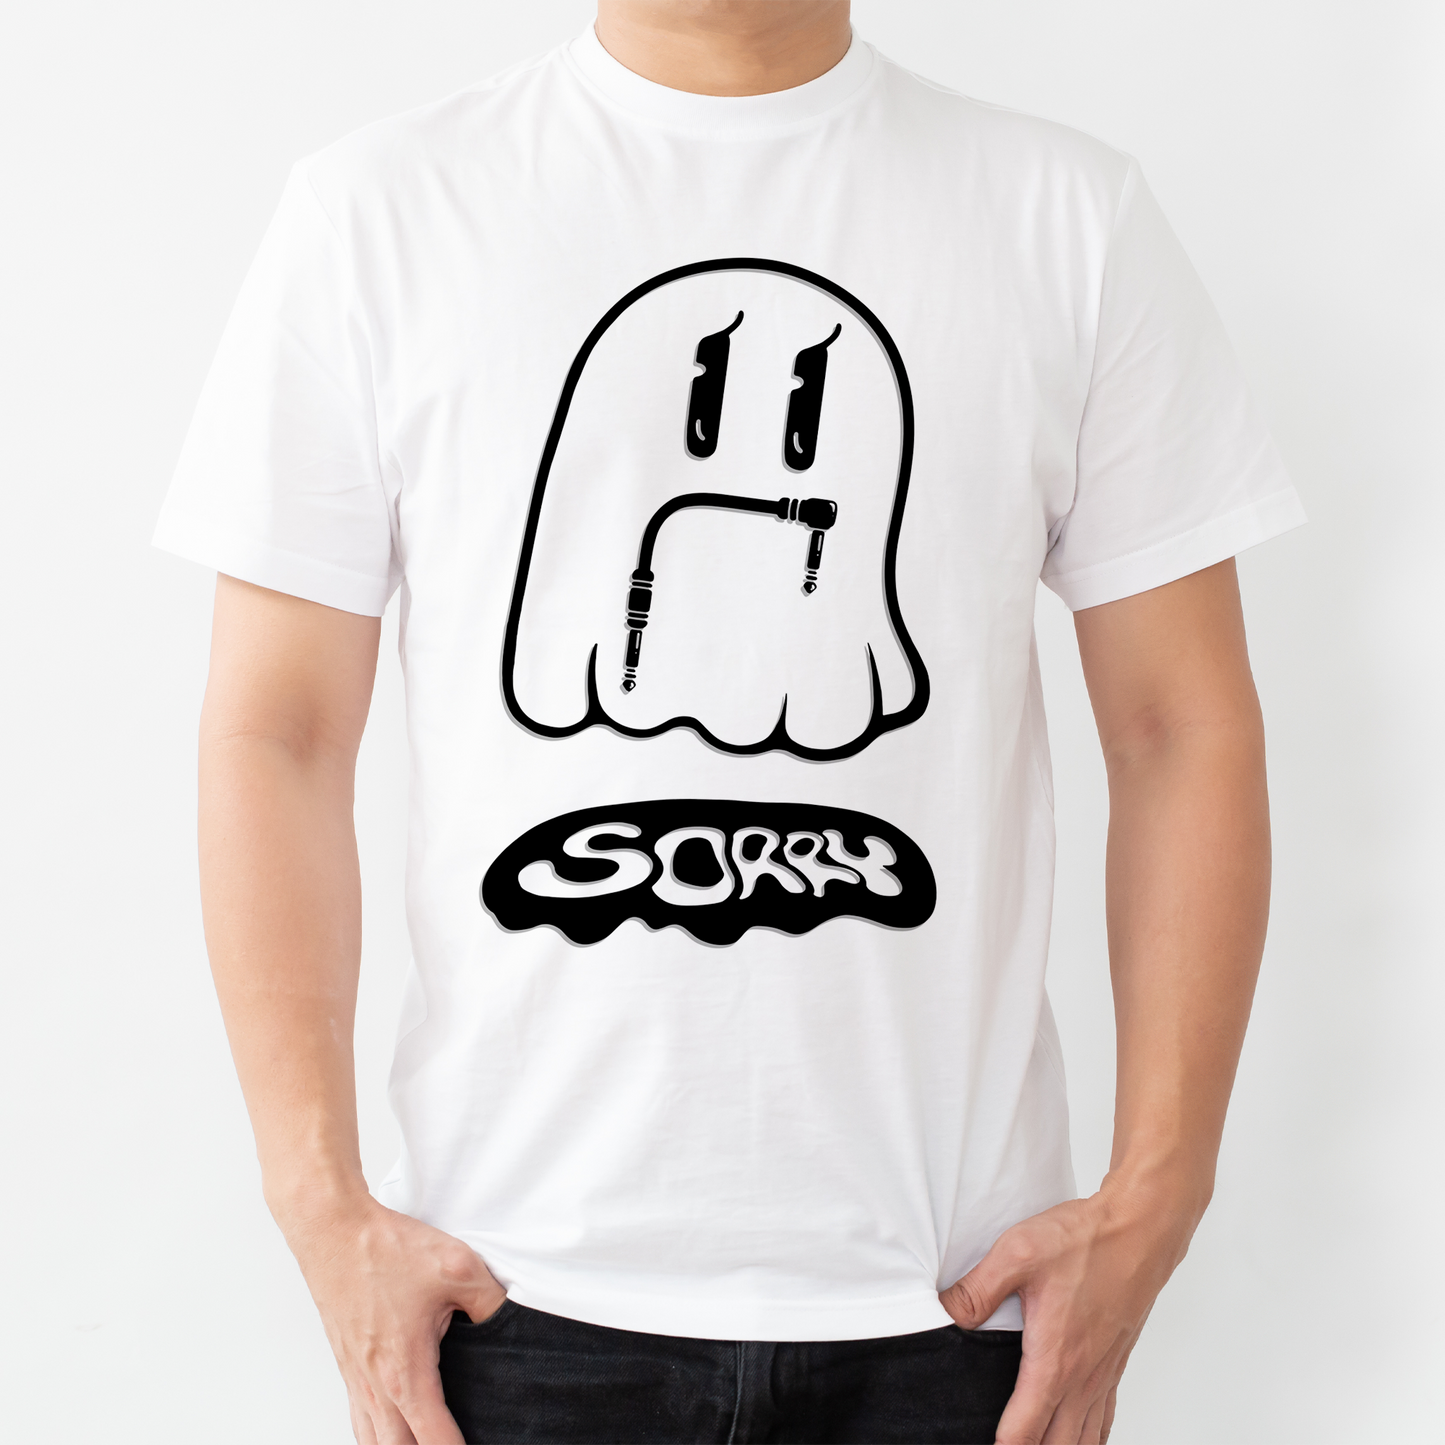 SORRY Cables™ Shirt! Ghost Logo